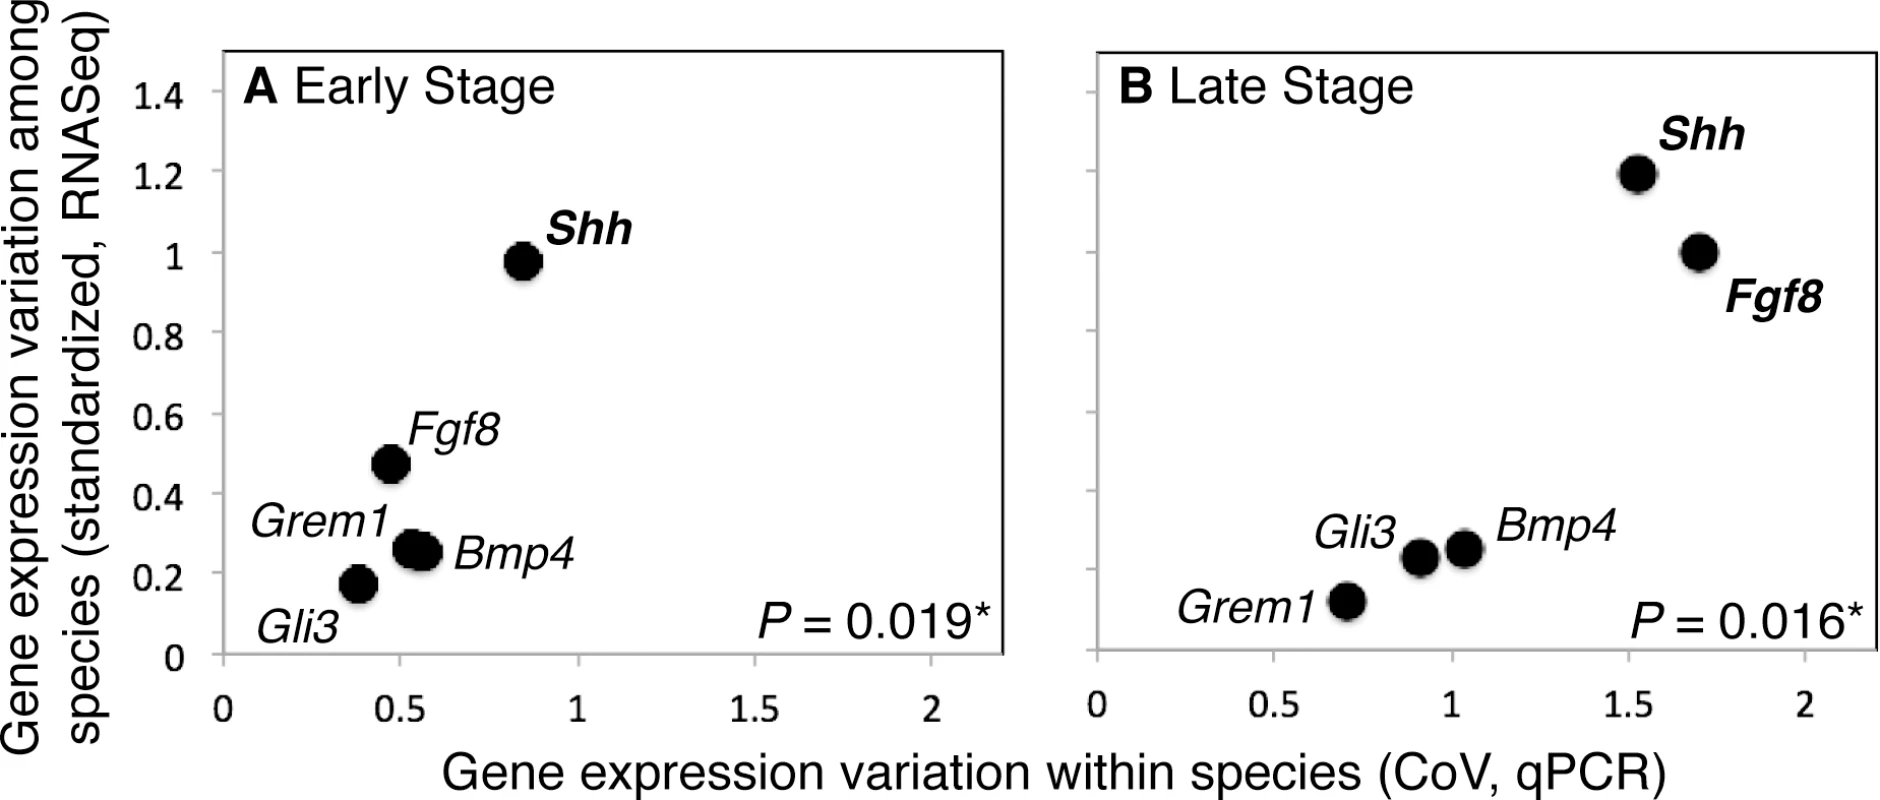 Variation in gene expression levels within a population of mice and among mammalian species are positively correlated during the Early (ES; A) and Late (LS; B) stages of limb development.